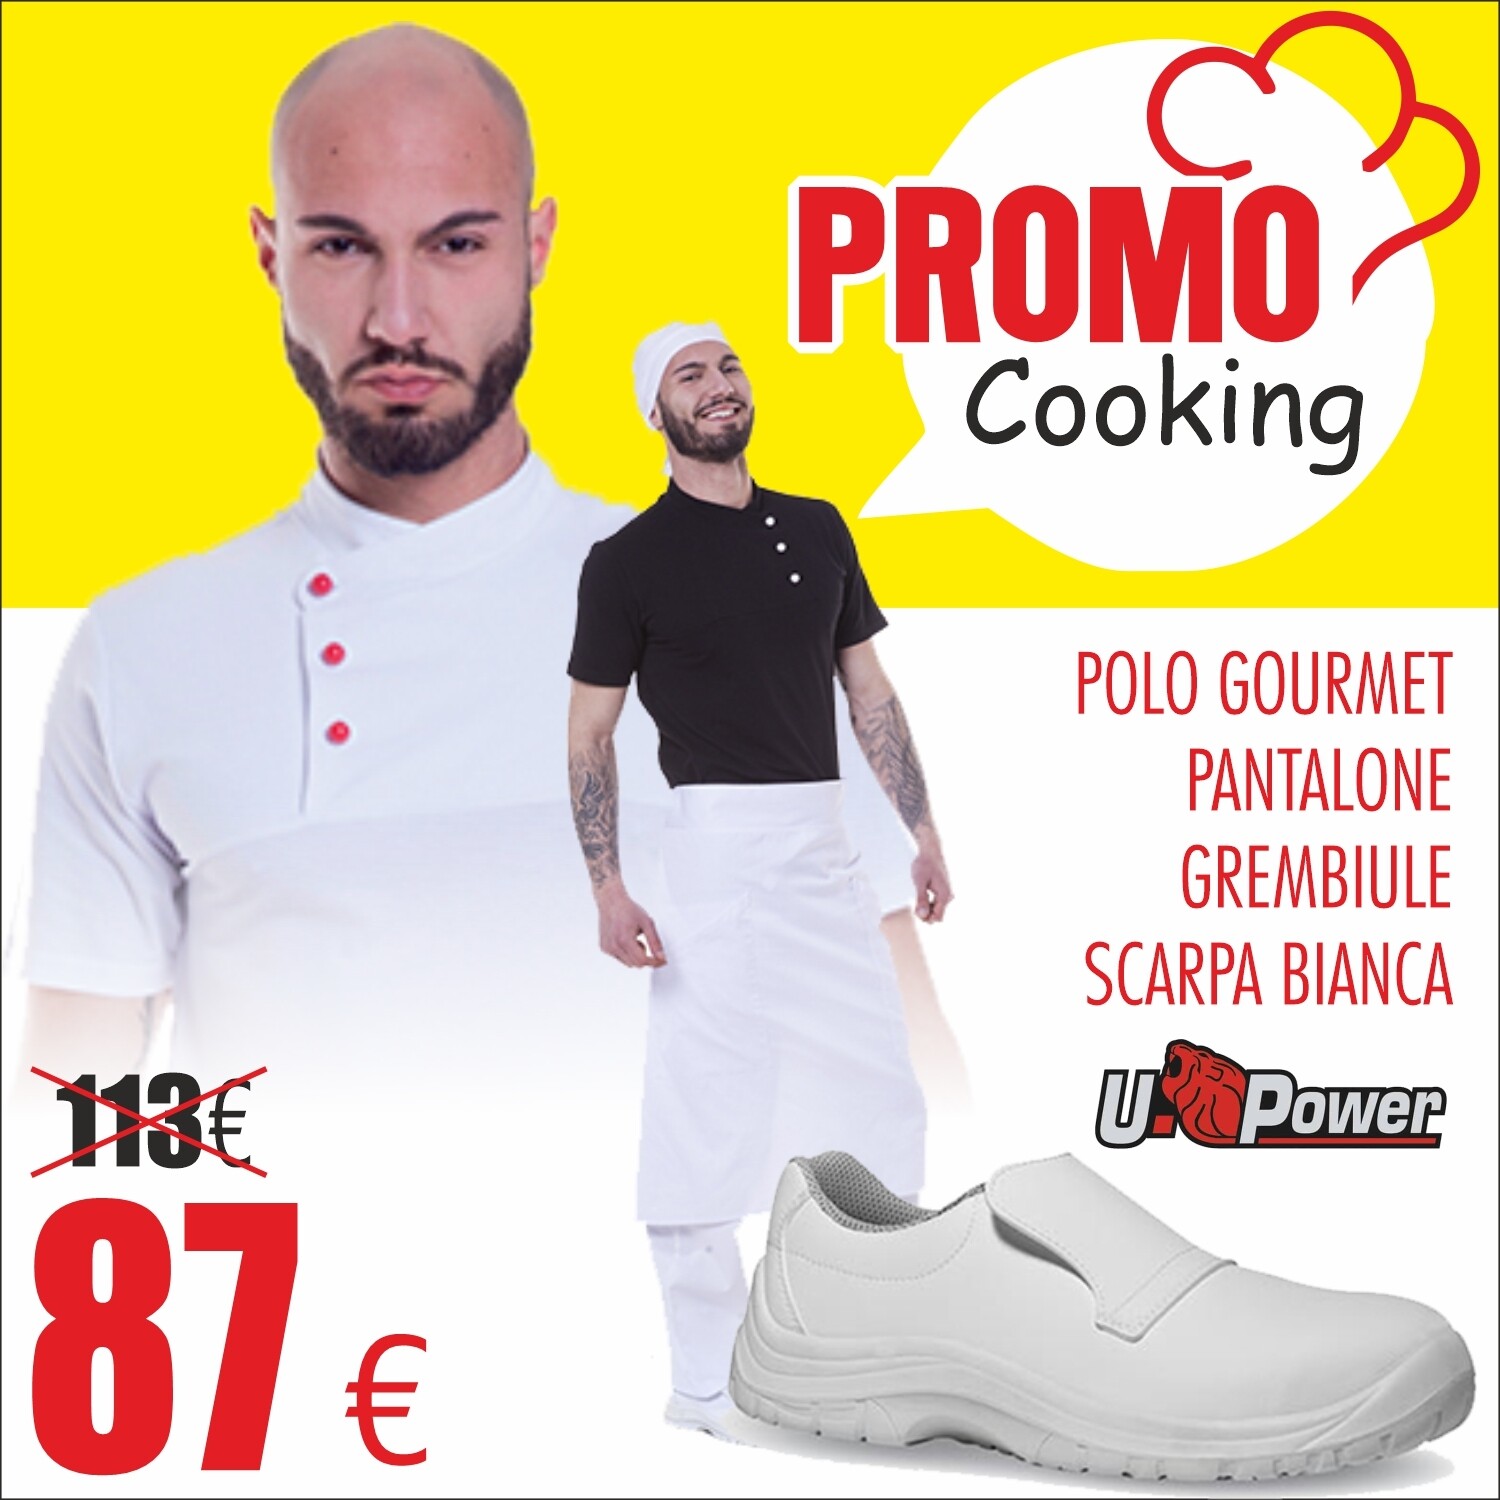 PROMO COOKING ONE